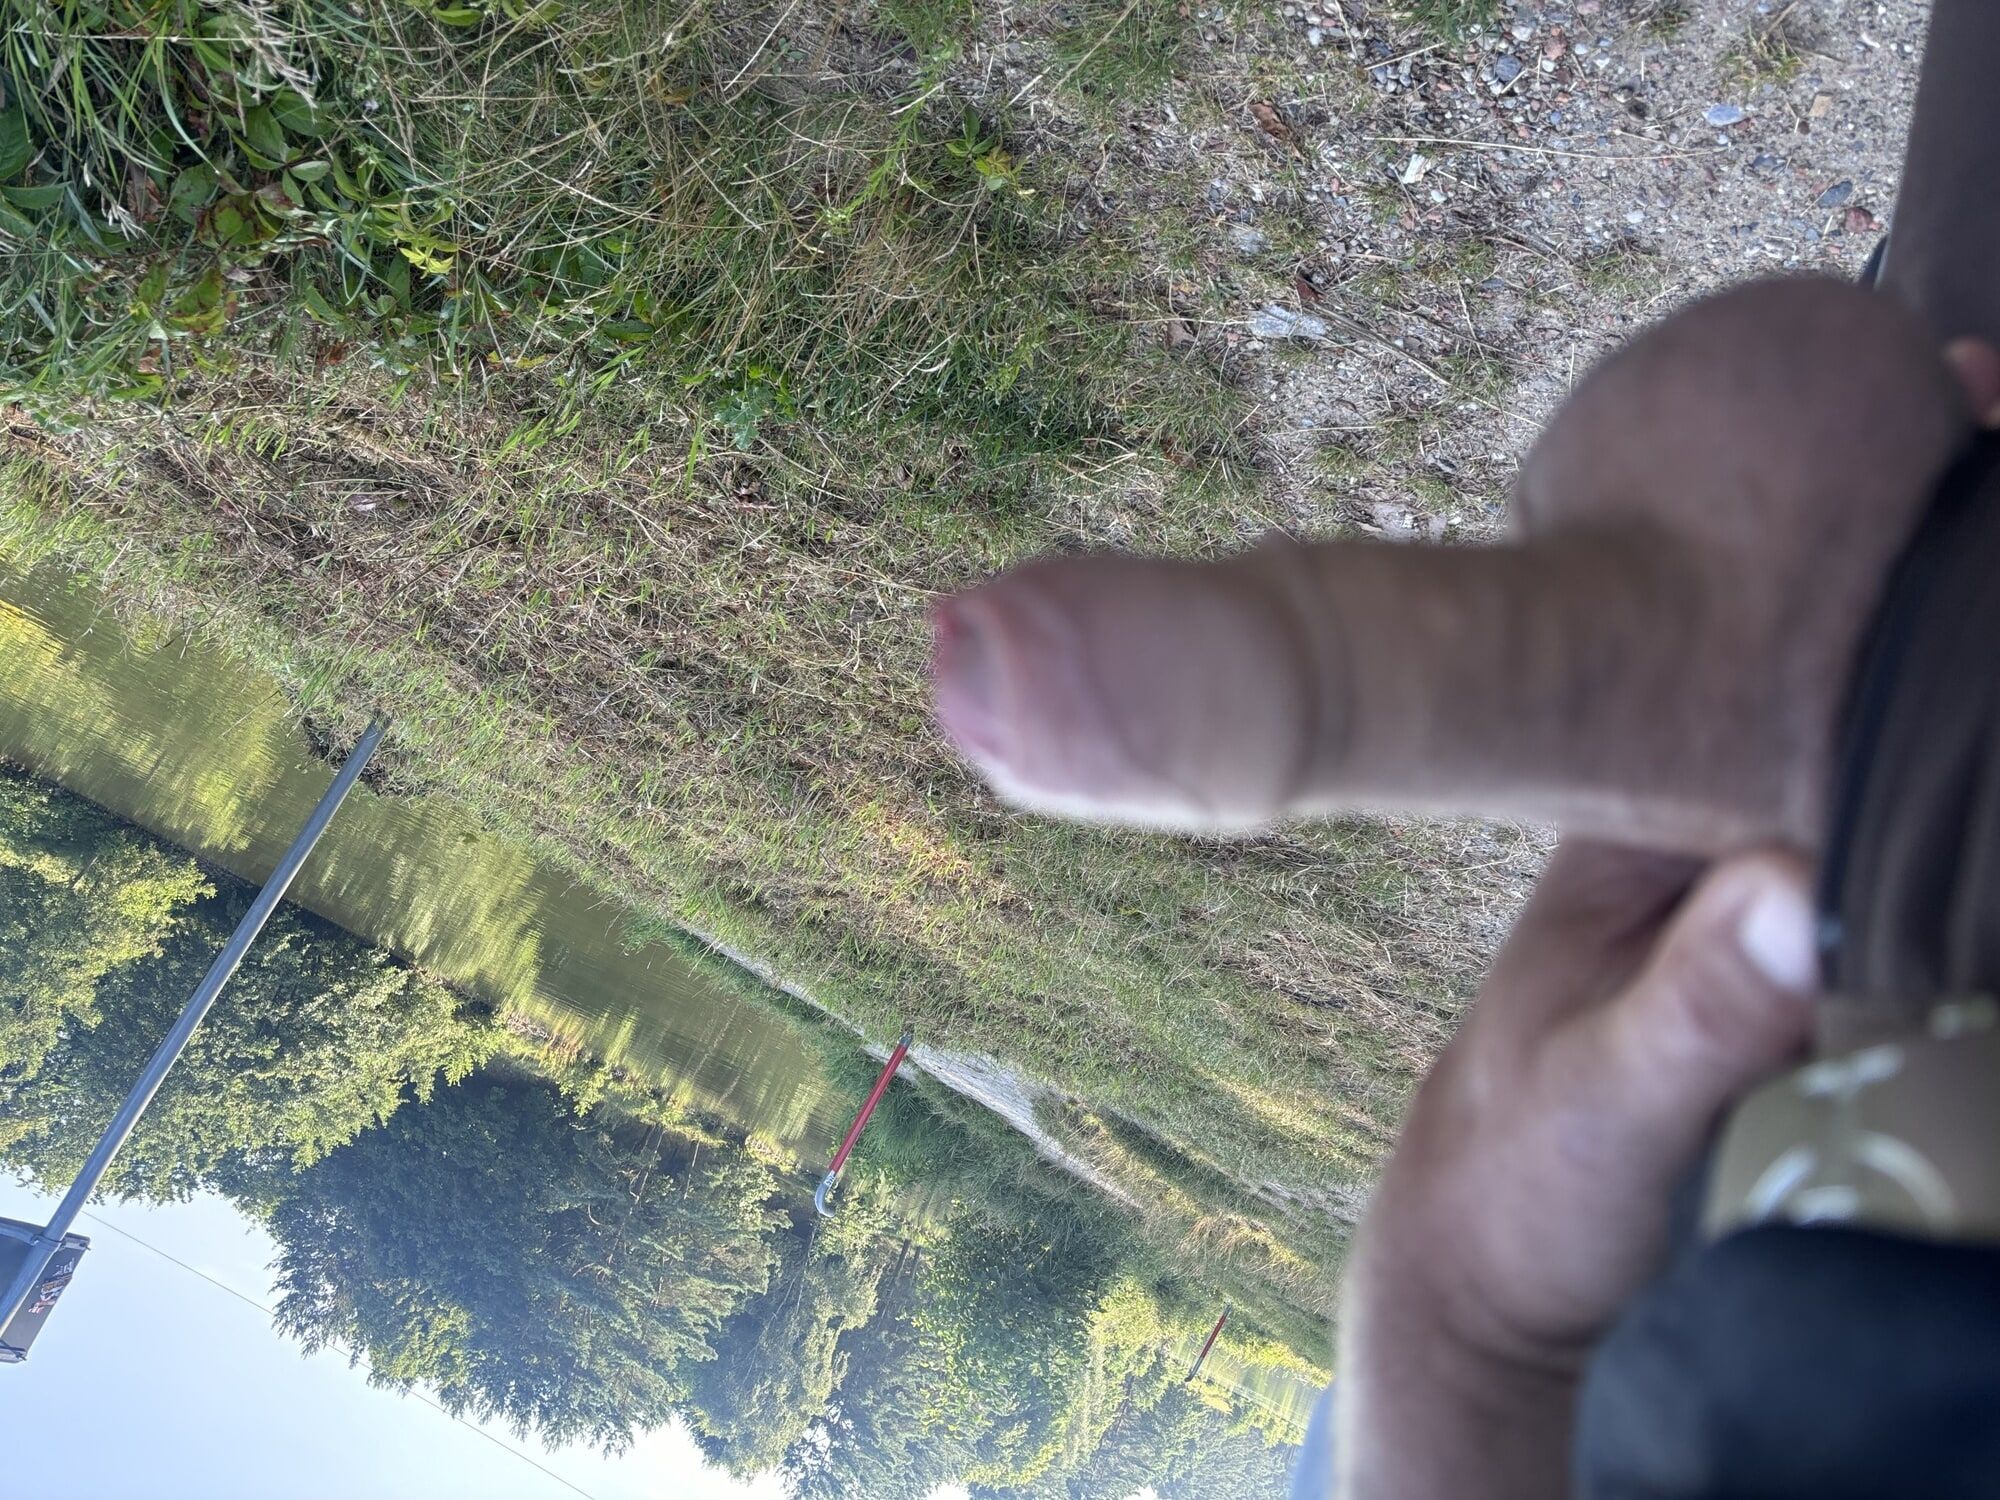 My dick outdoor at the lake